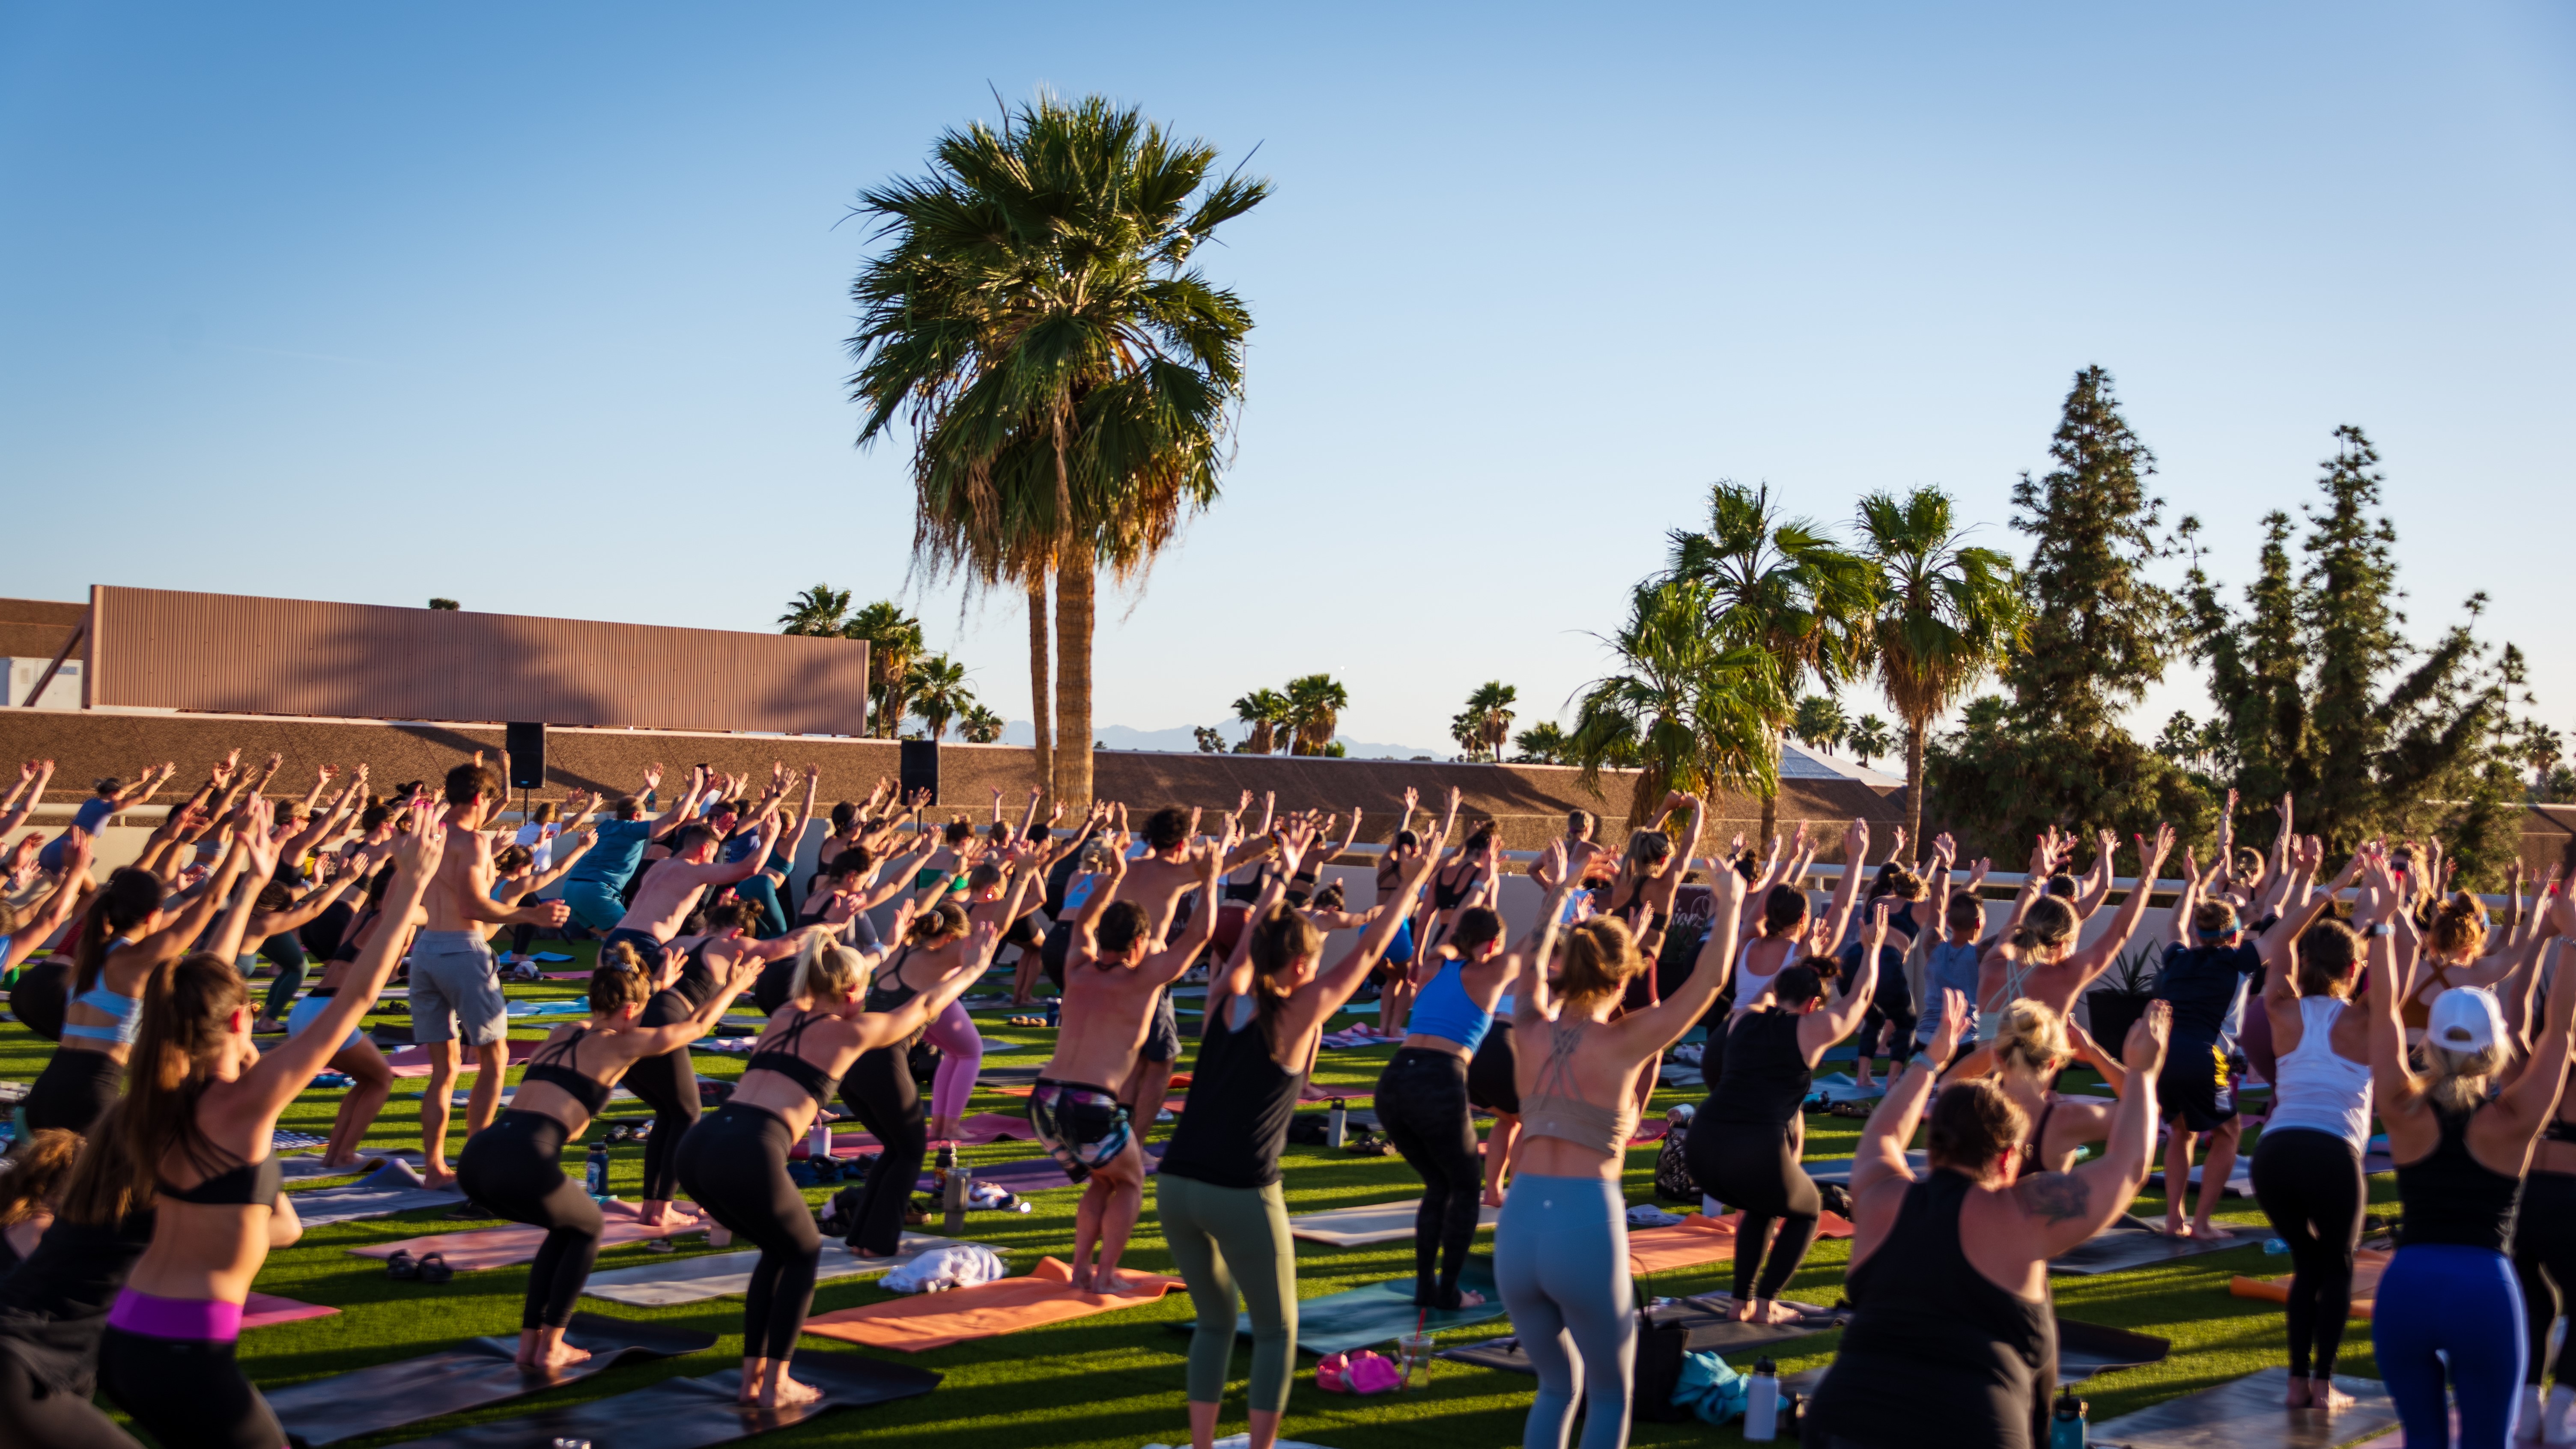 Many people doing yoga on a rooftop at sunset